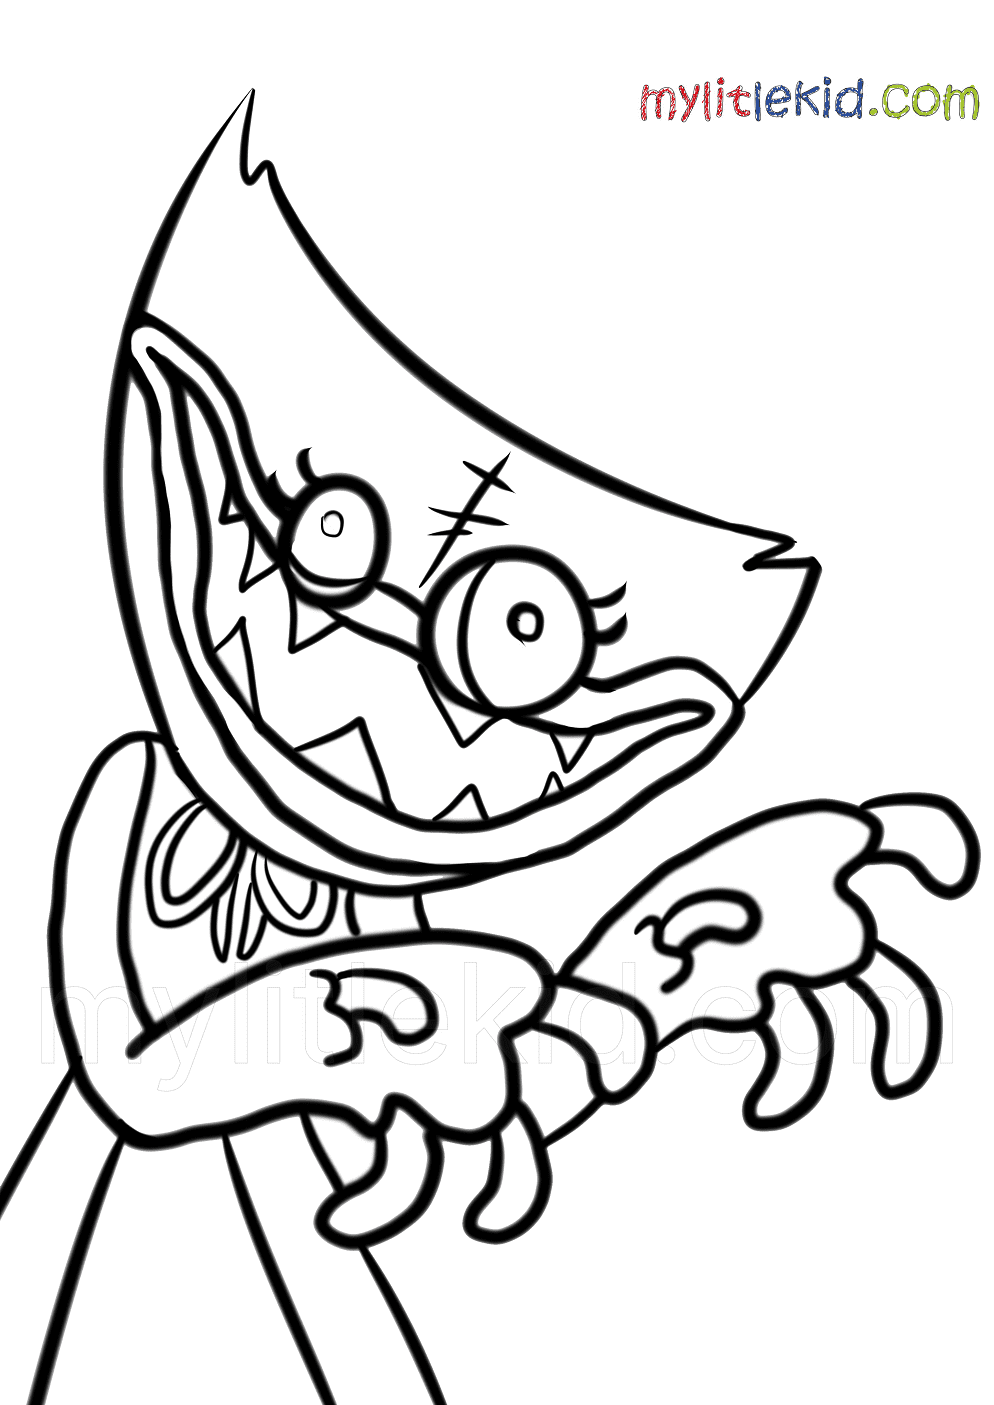 Scary Huggy Wuggy Coloring Page